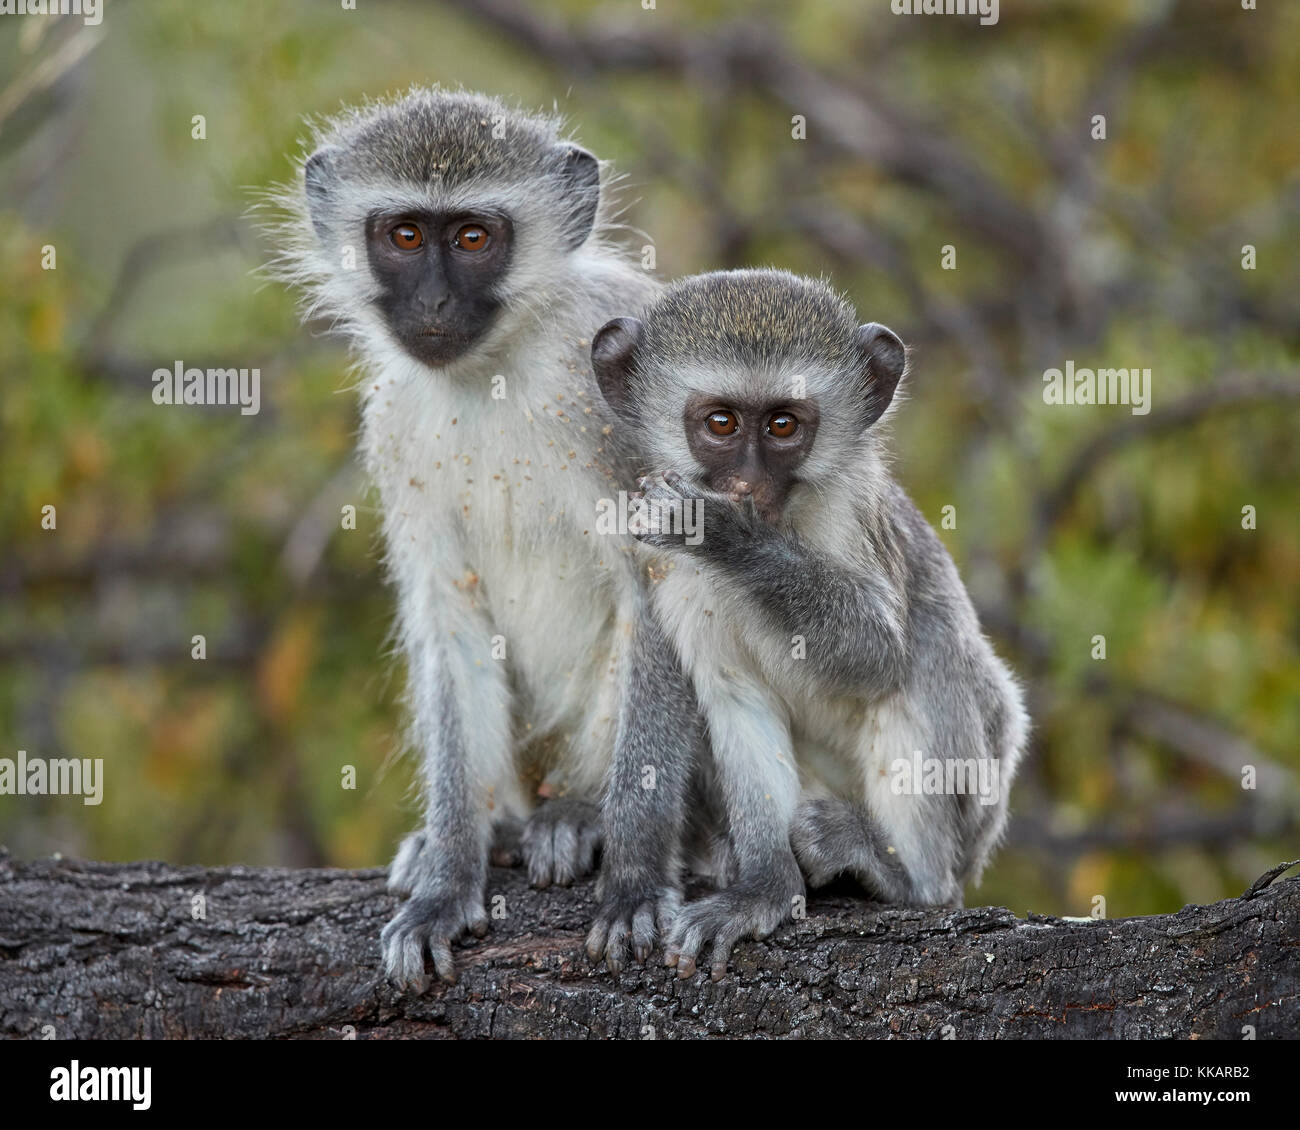 Two young Vervet Monkey (Chlorocebus aethiops), Mountain Zebra National Park, South Africa, Africa Stock Photo